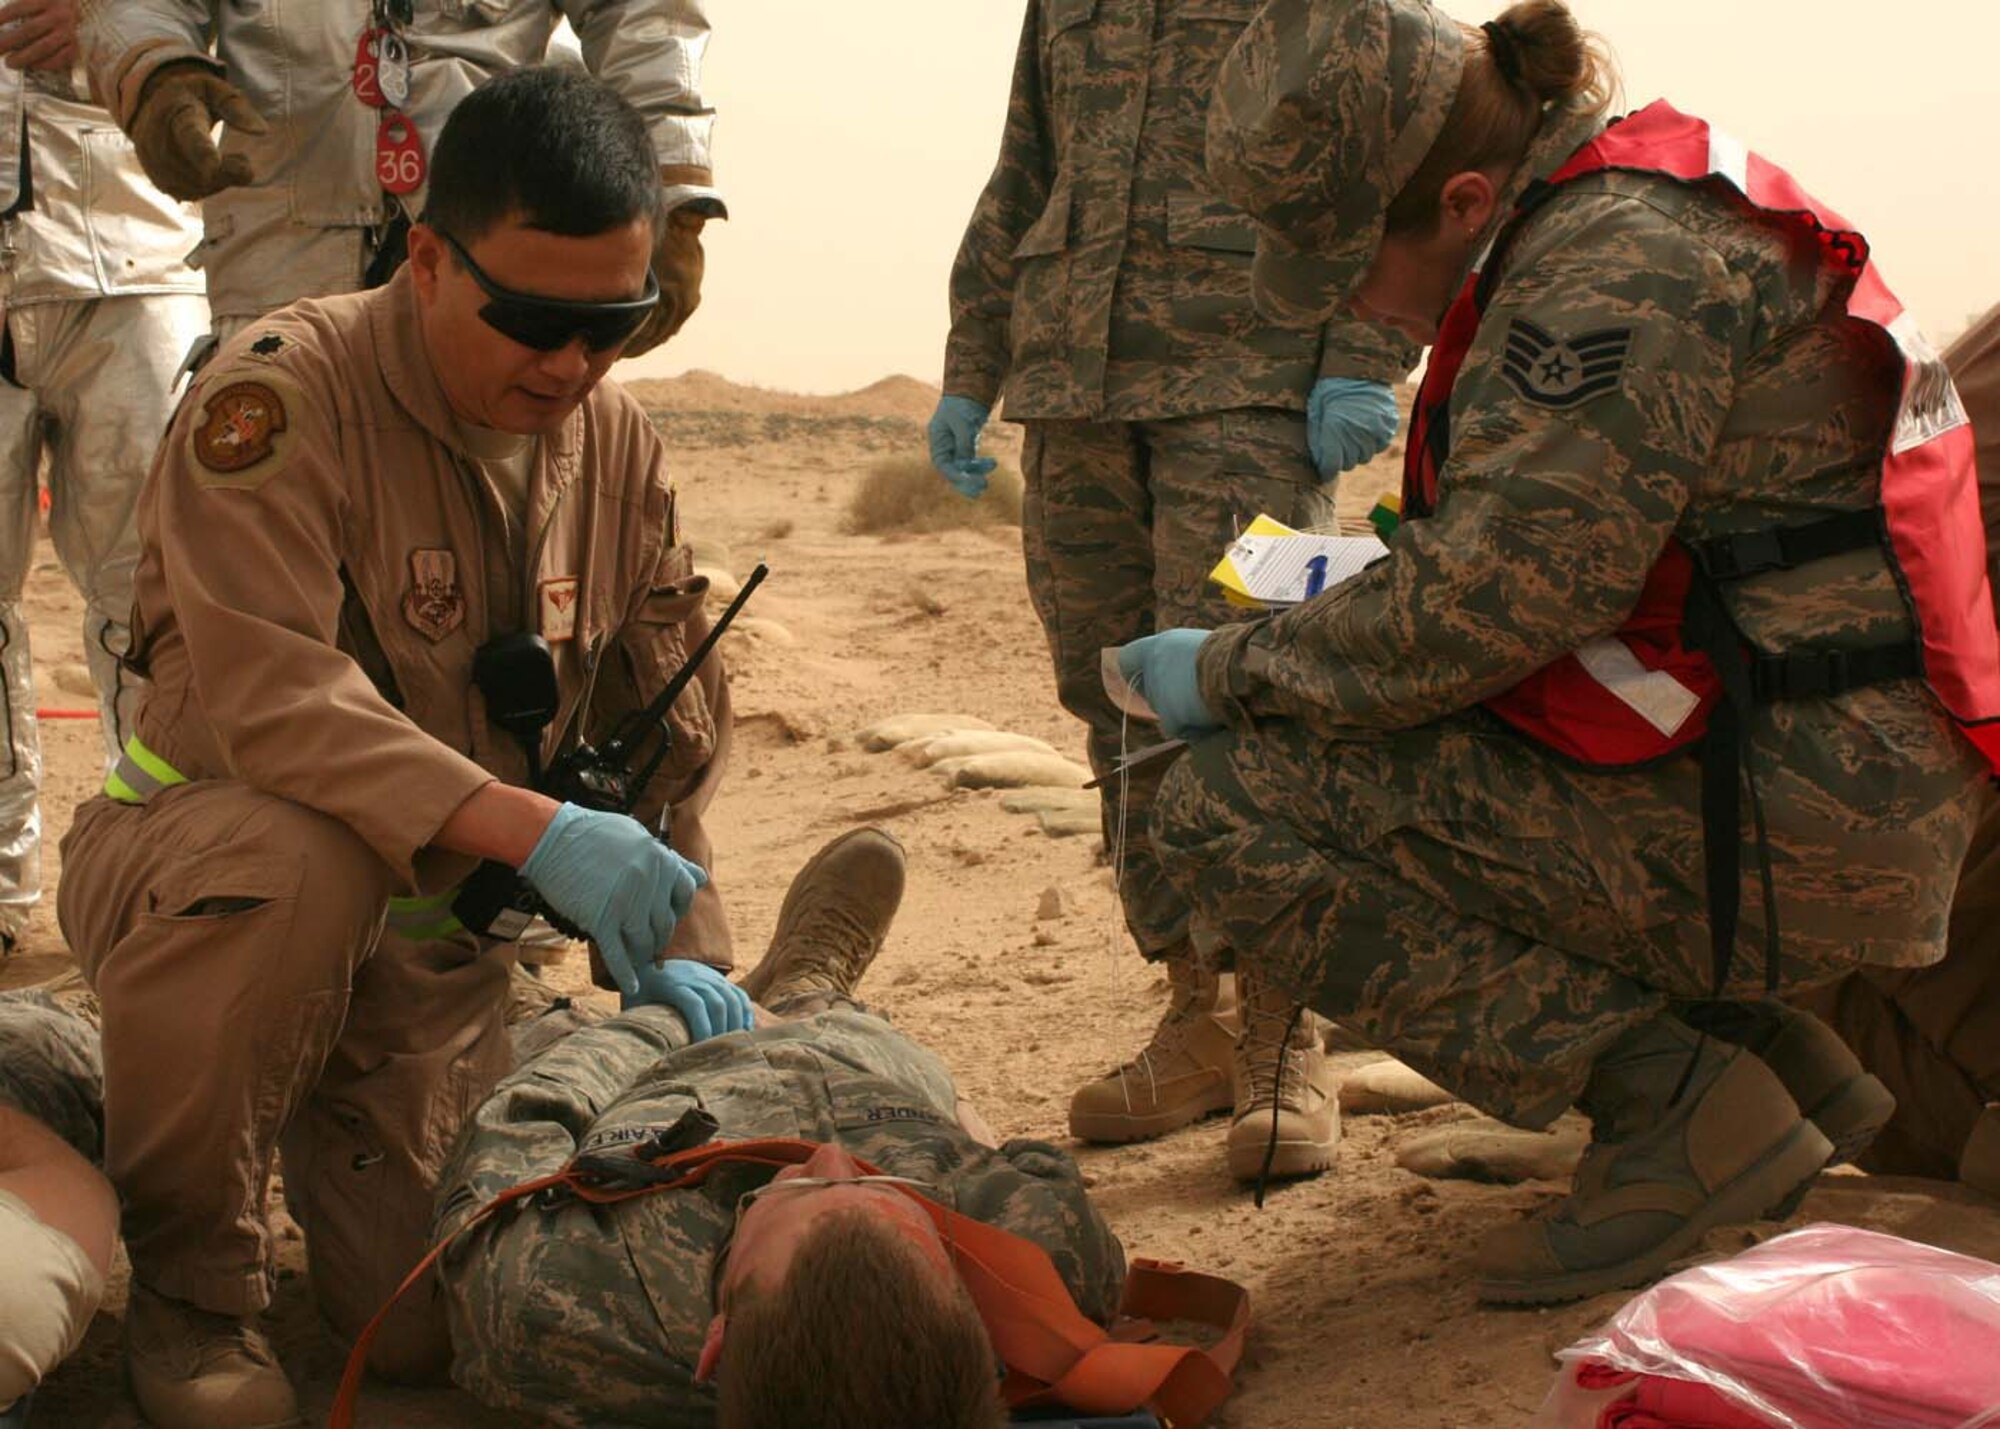 SOUTHWEST ASIA -- Lt. Col. Jianzhong Zhang, 386th Air Expeditionary Medical Group, evaluates a mock victim while Staff Sgt. Betty Schnoop, 386th EMDG, transcribes during an exercise at an air base in Southwest Asia, Feb. 23. The exercise required the response of Security Forces, Fire Department, and Medical teams to a bus accident. (U.S. Air Force photo/ Staff Sgt. Shaun Denton)